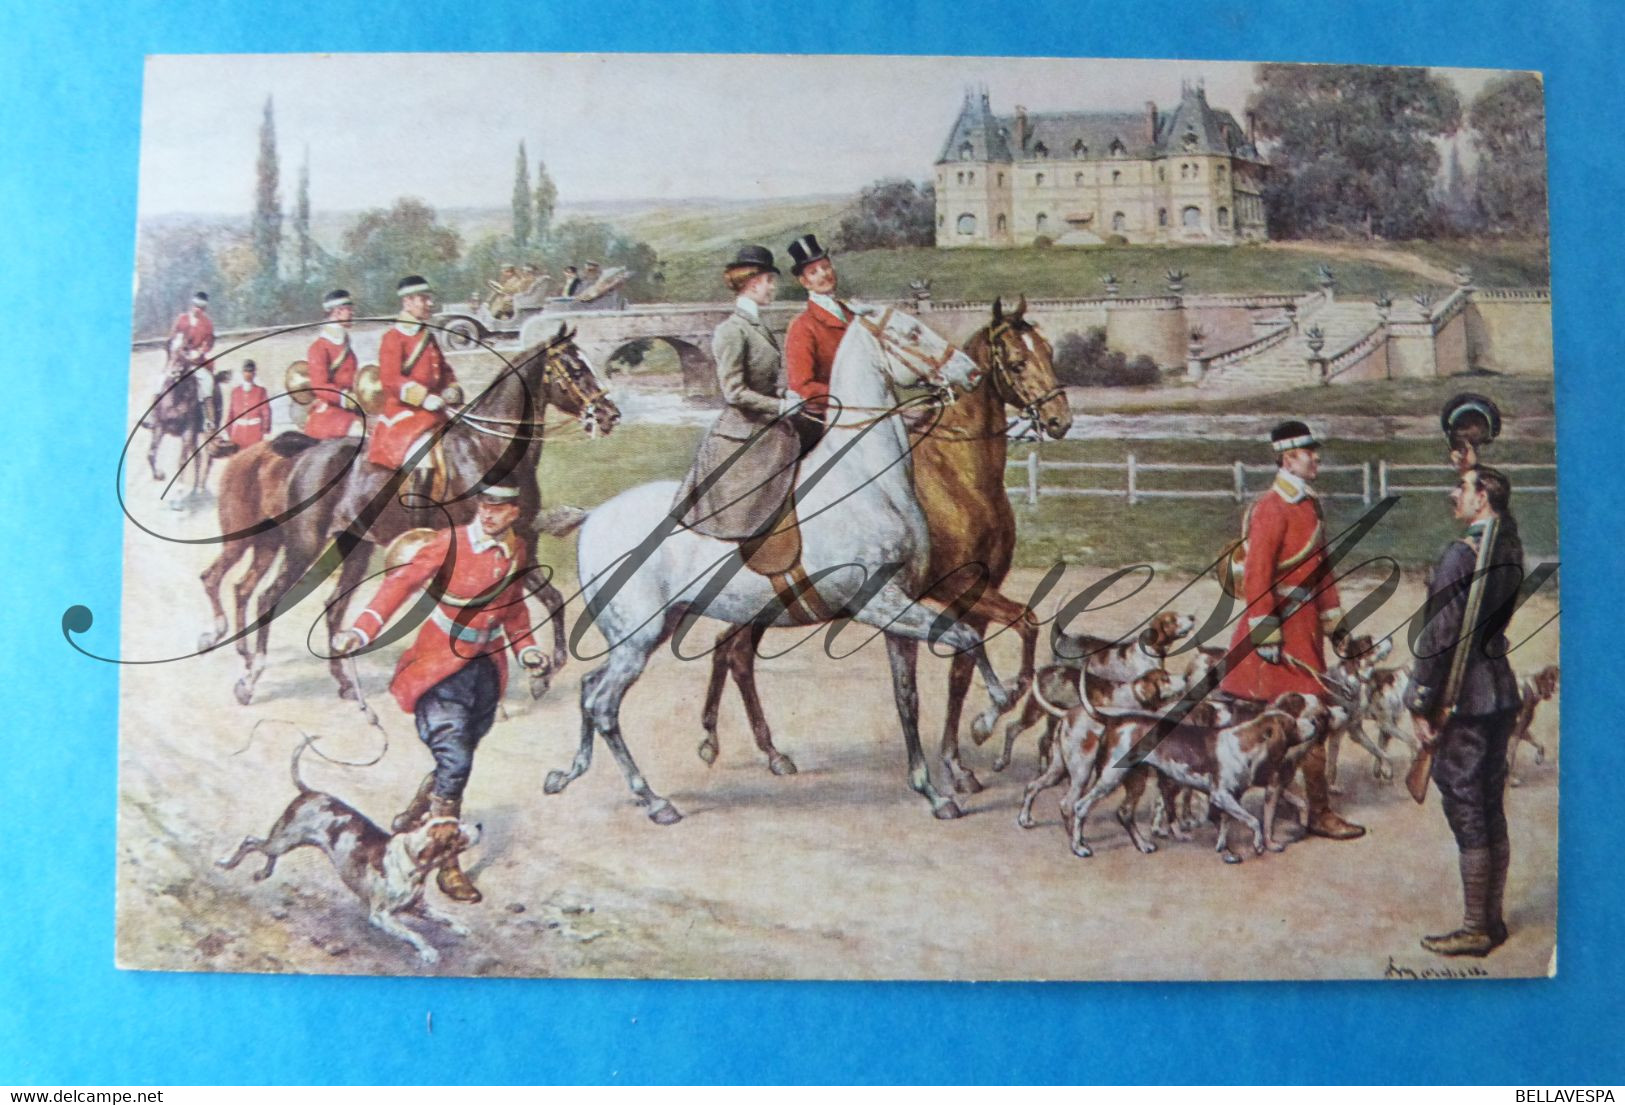 T.S.N. Serie 1213 Cheval  Fox Hunting Vossenjacht Victorian Style; Edit Theo Stroefer Nürnberg Litho - Caza